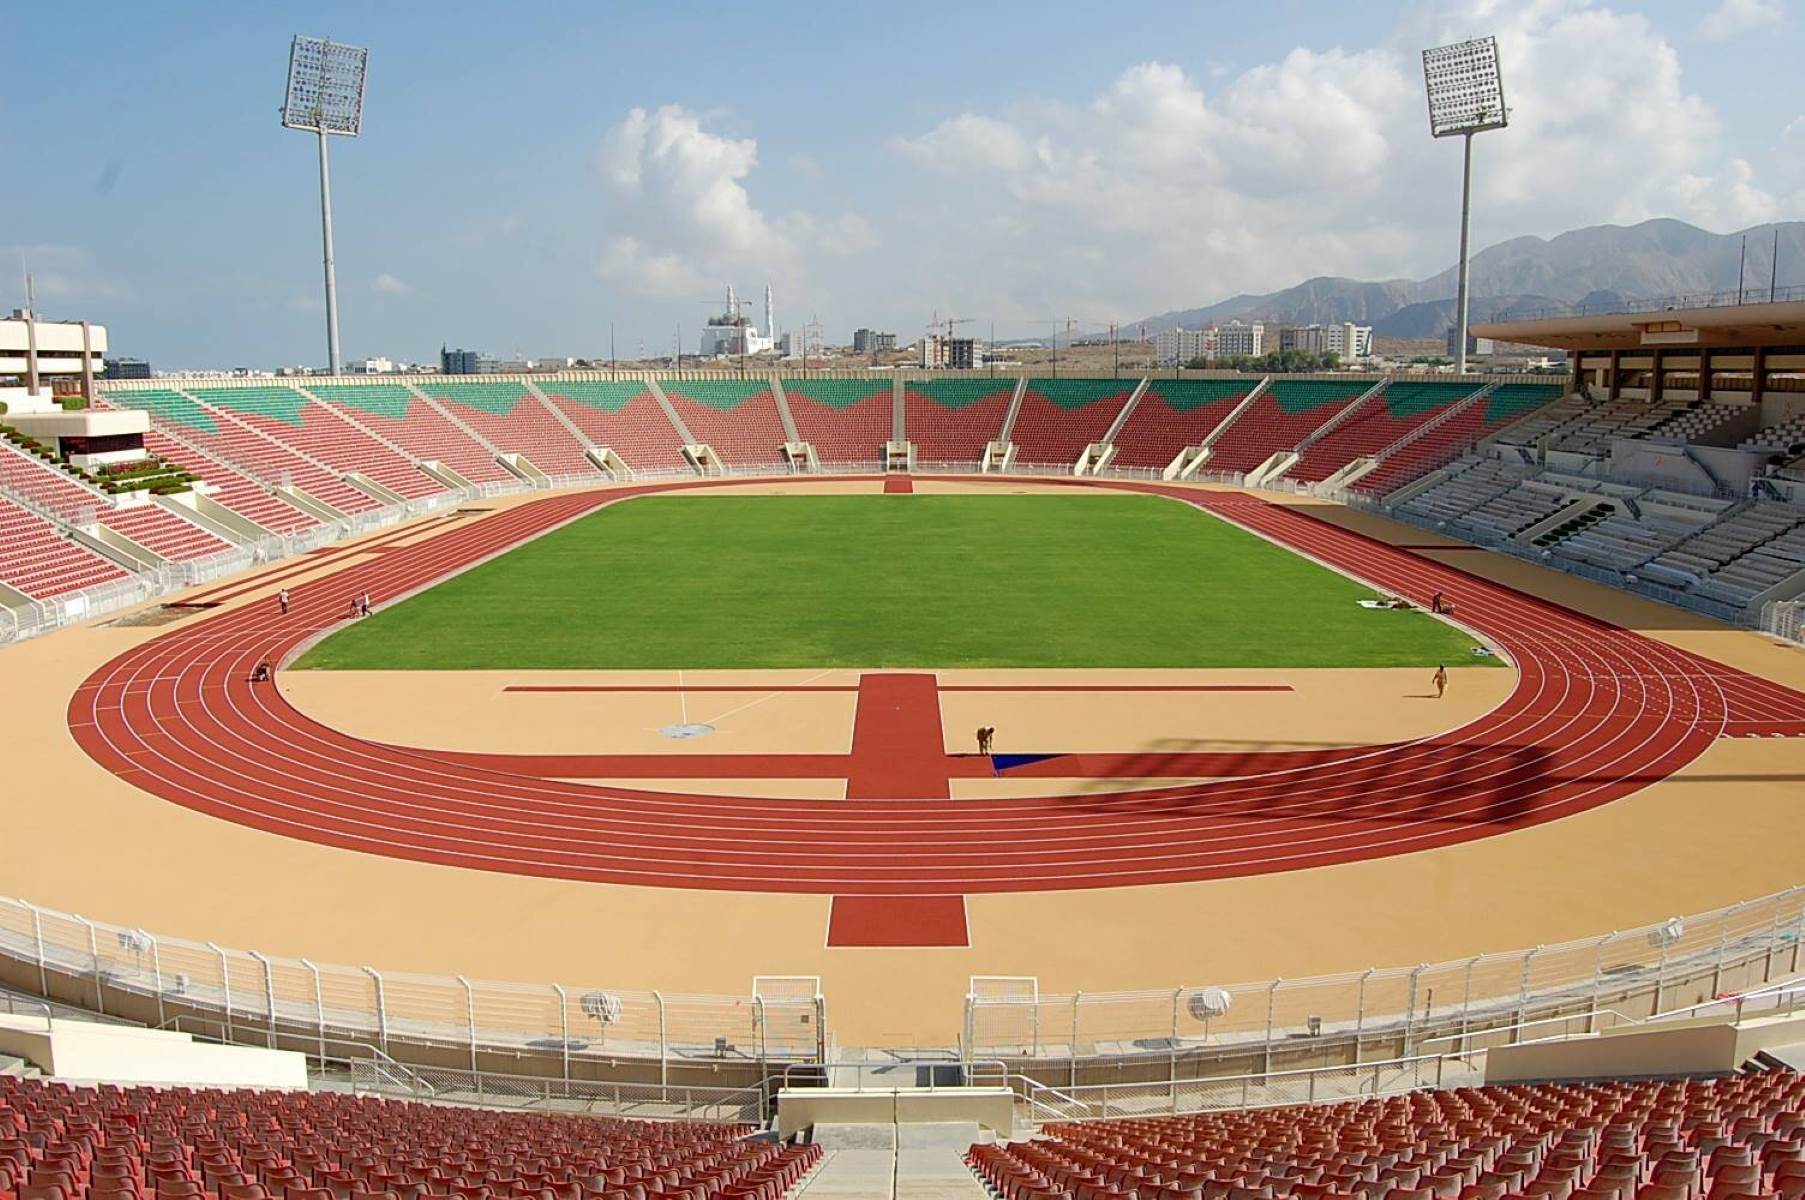 20-astounding-facts-about-sultan-qaboos-sports-complex